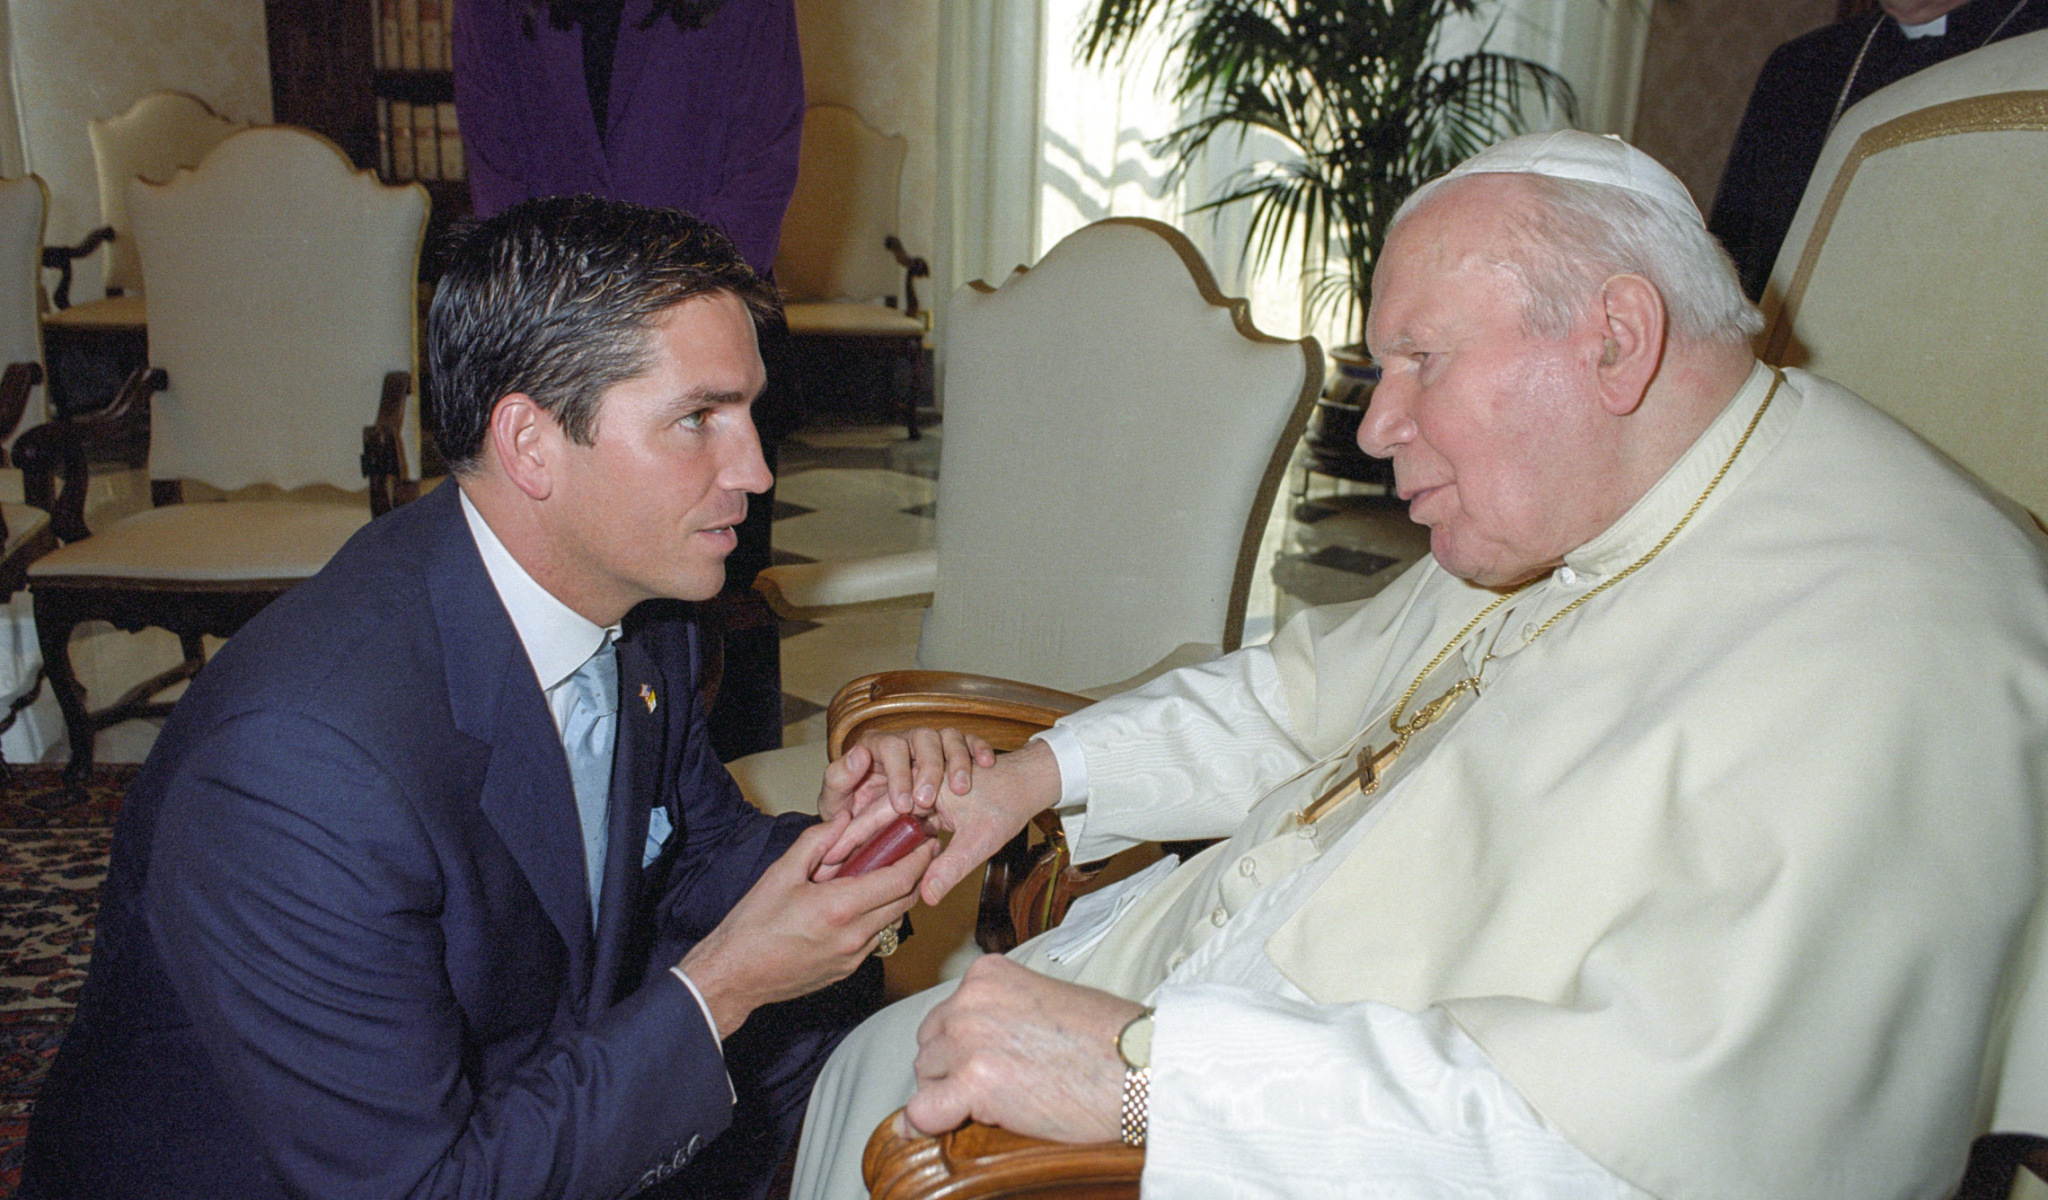 March 15 2004 : Pope John Paul II meets the actor Jim Caviezel in the Vatican. (Jim Caviezel is an American actor, best known for portraying Jesus Christ in the 2004 film The Passion of the Christ) EDITORIAL USE ONLY. NOT FOR SALE FOR MARKETING OR ADVERTISING CAMPAIGNS.